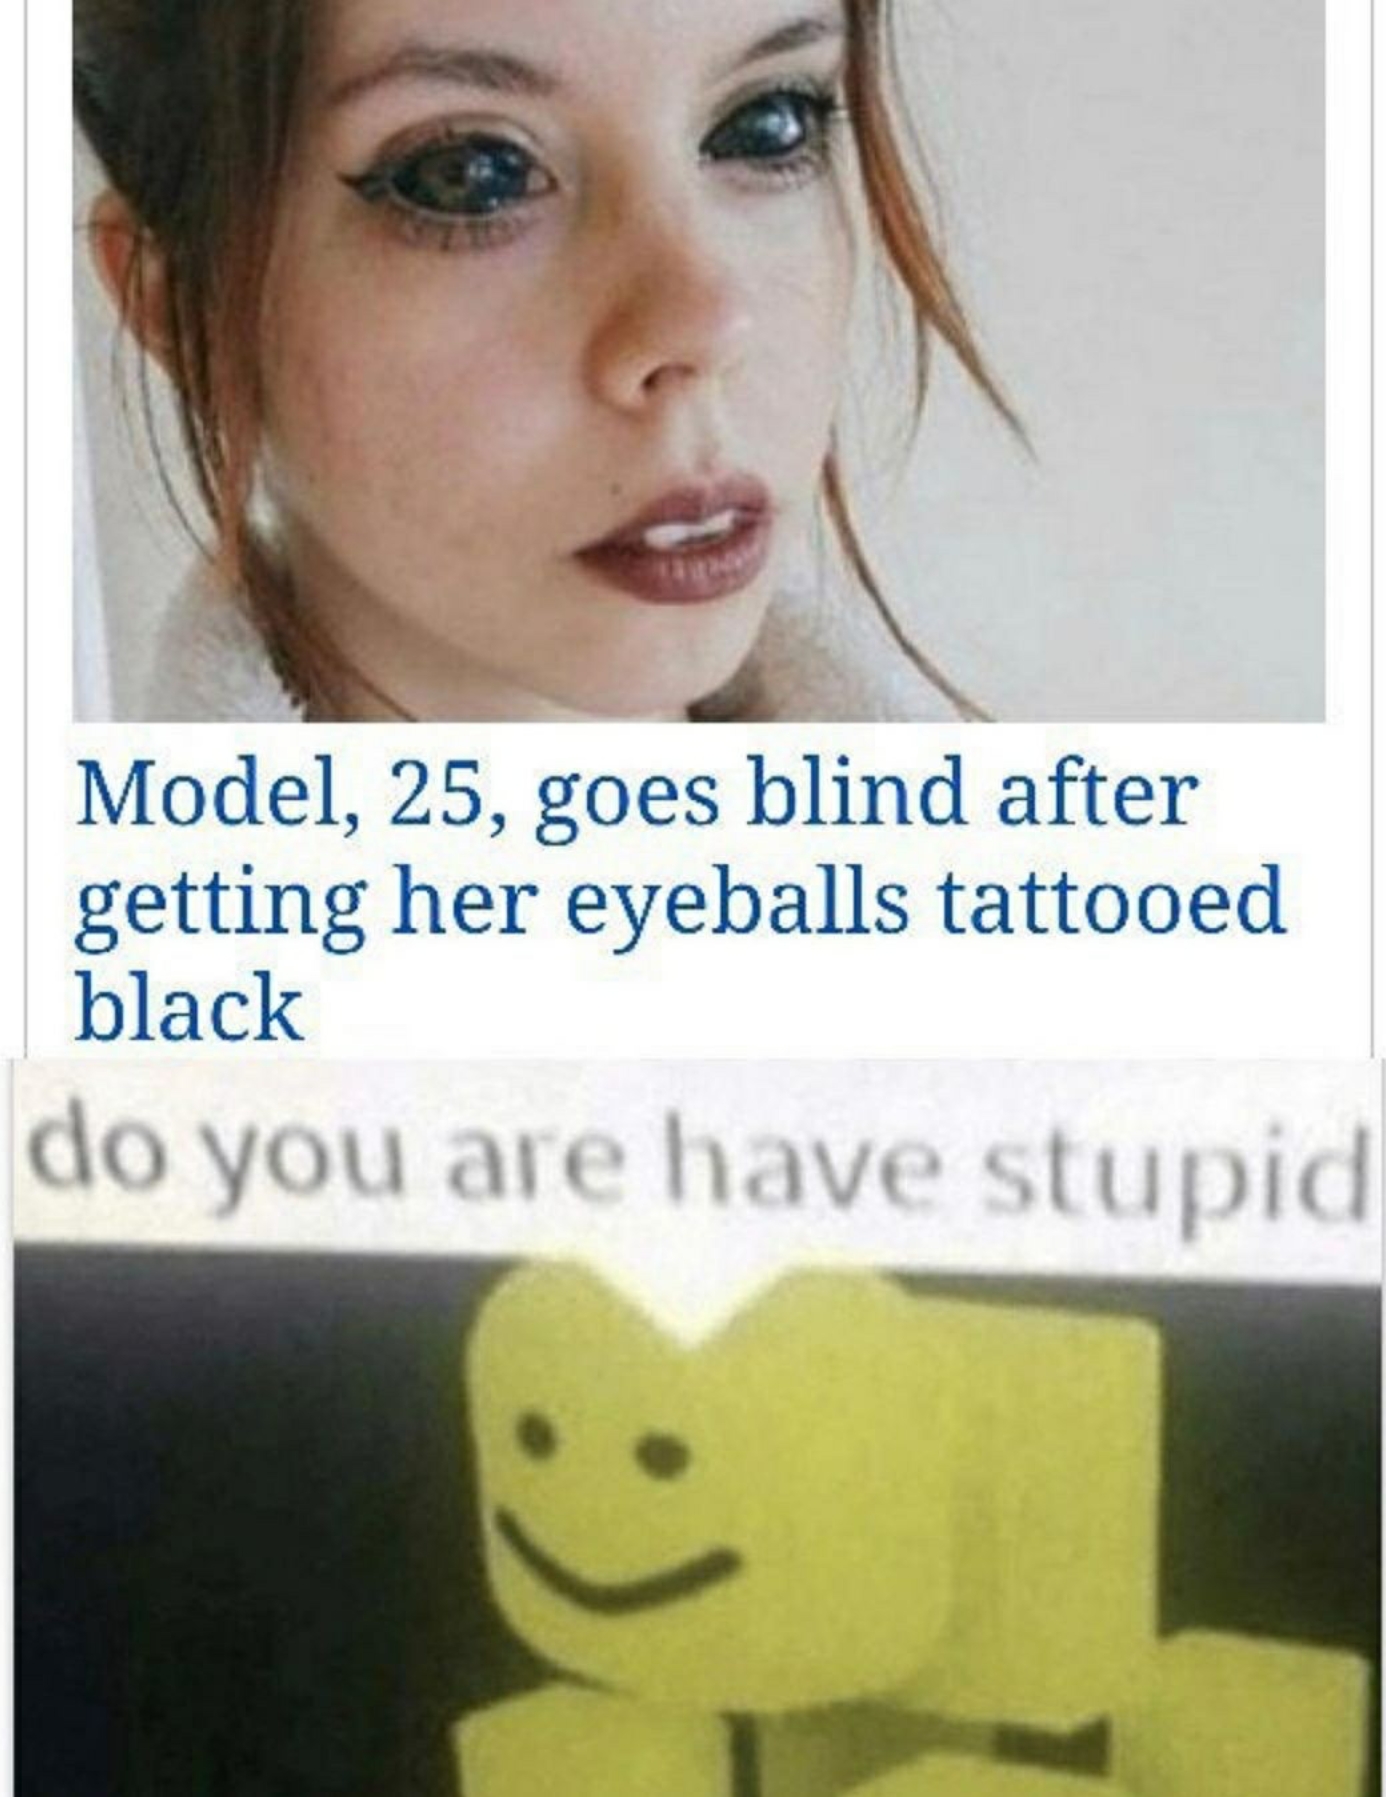 do you are have stupid - Model, 25, goes blind after getting her eyeballs tattooed black do you are have stupid